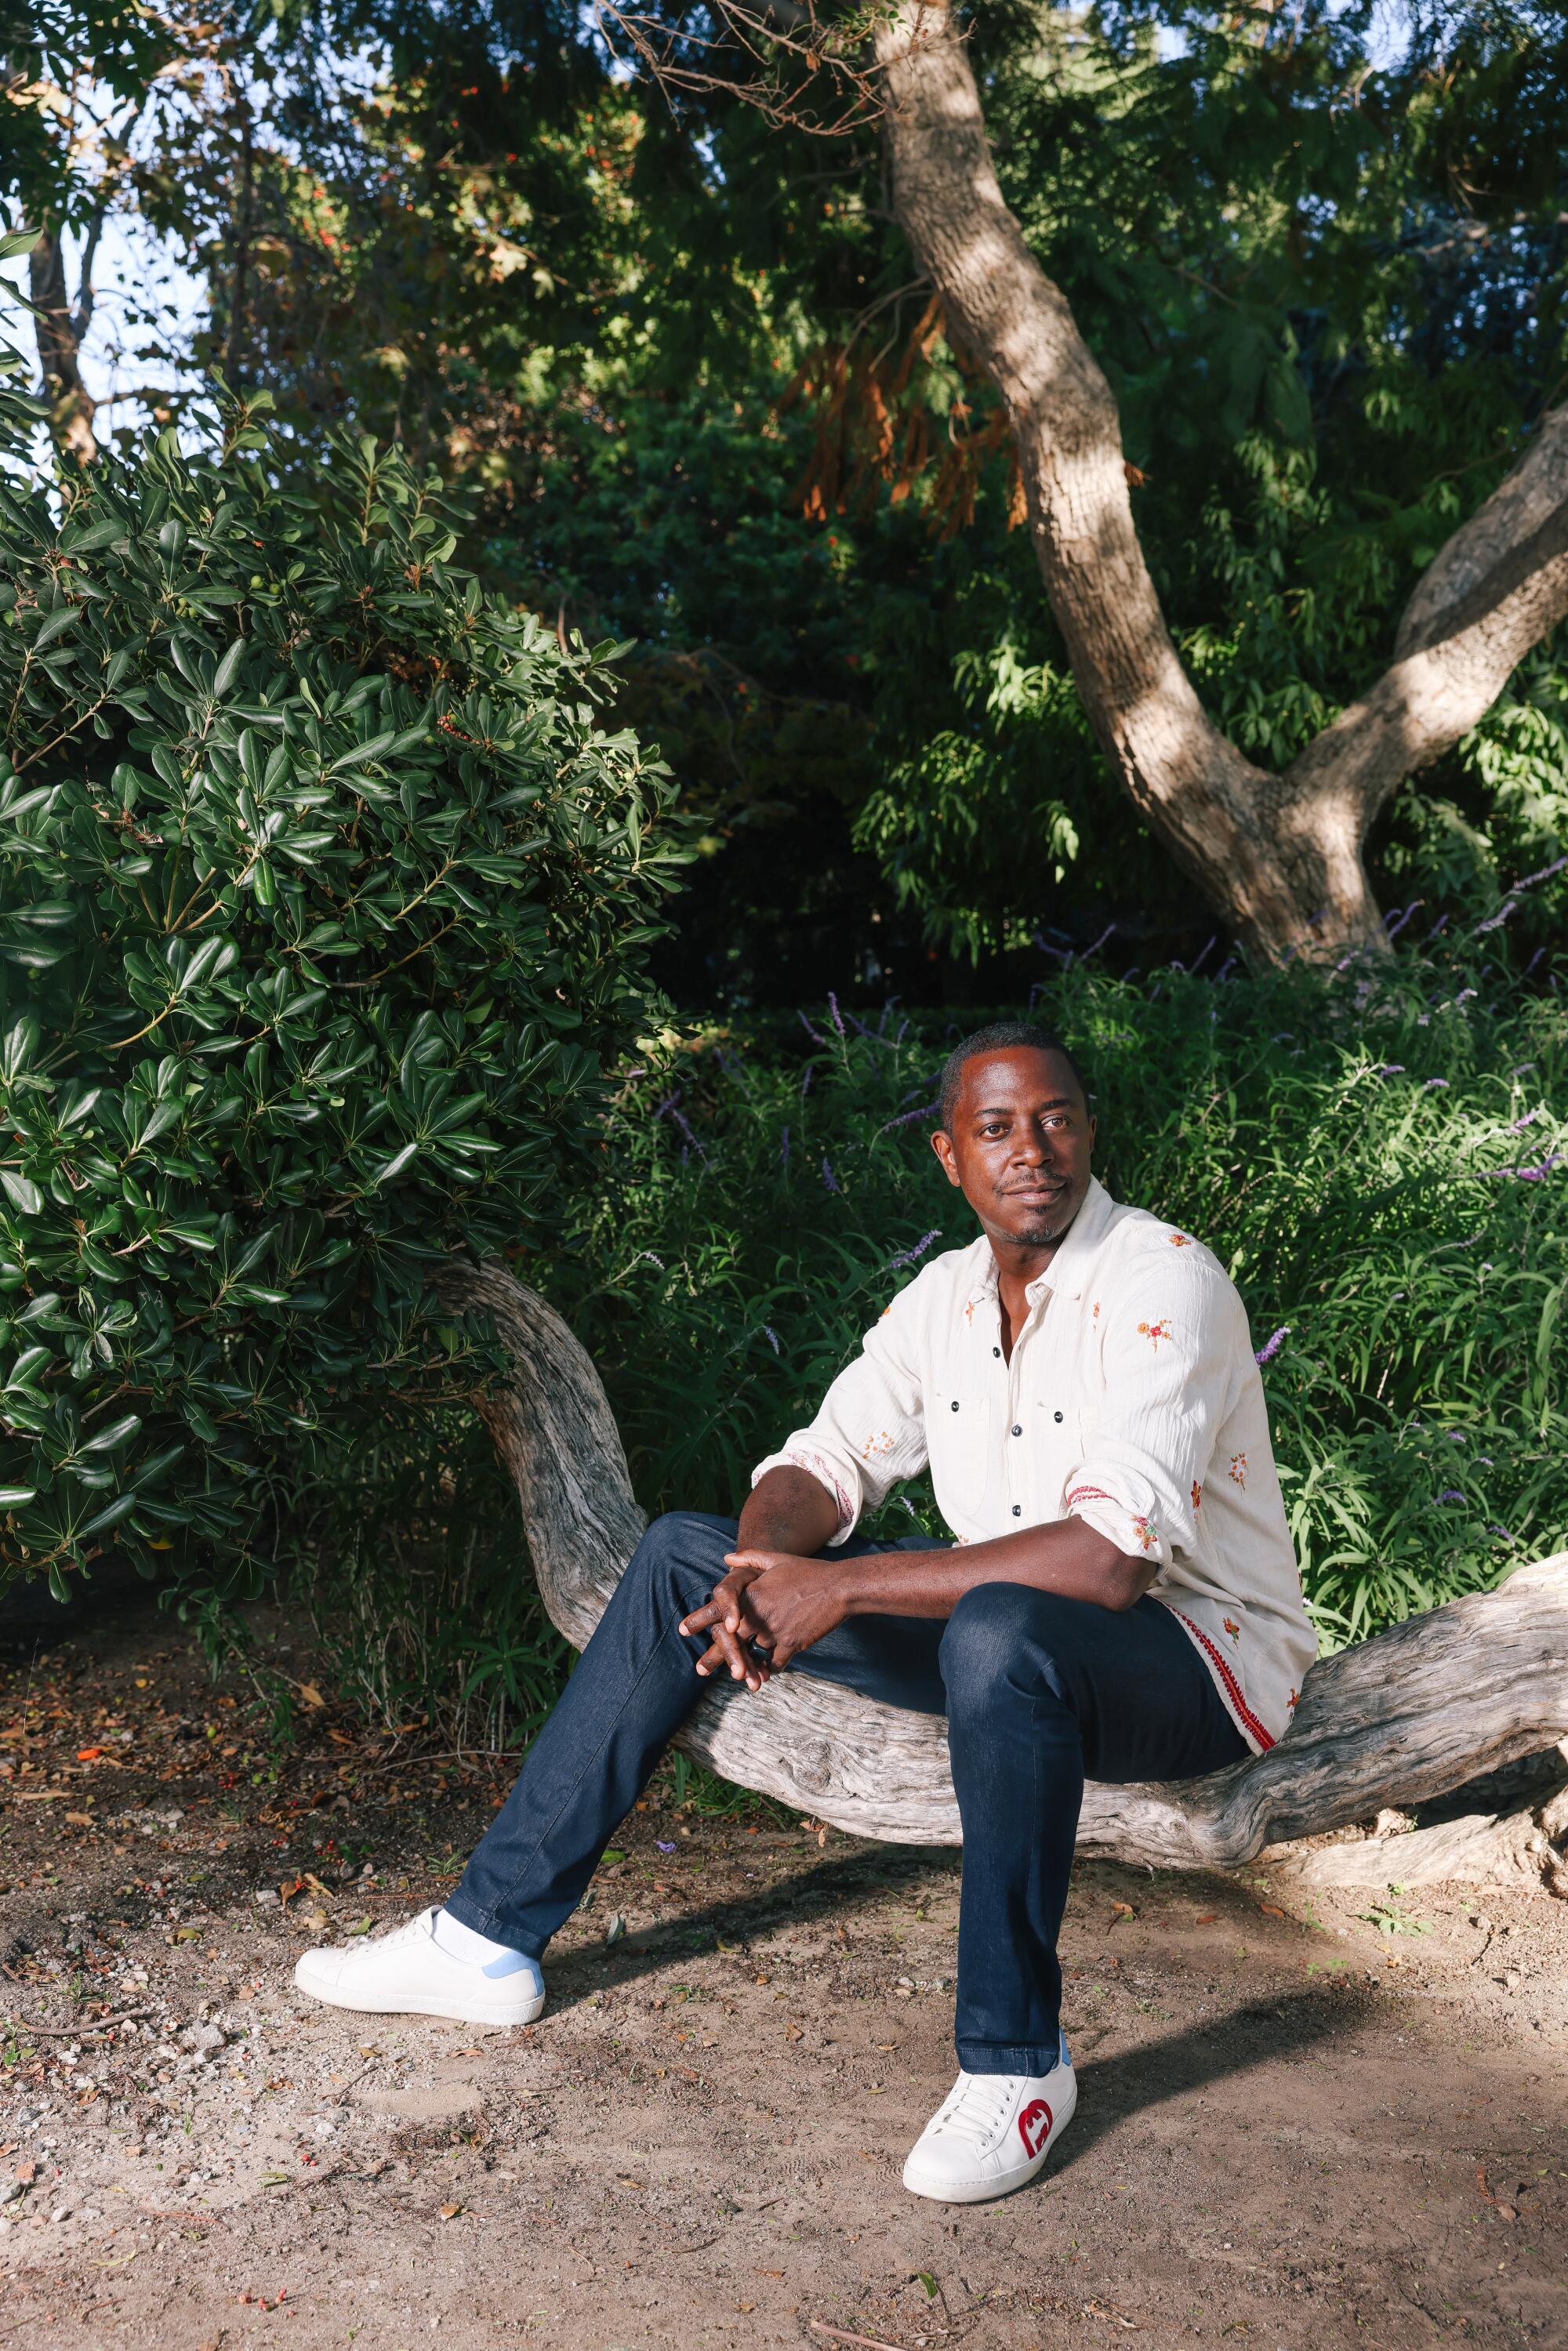 Sanford Biggers sits on a low tree branch in a cream-colored shirt and dark blue jeans